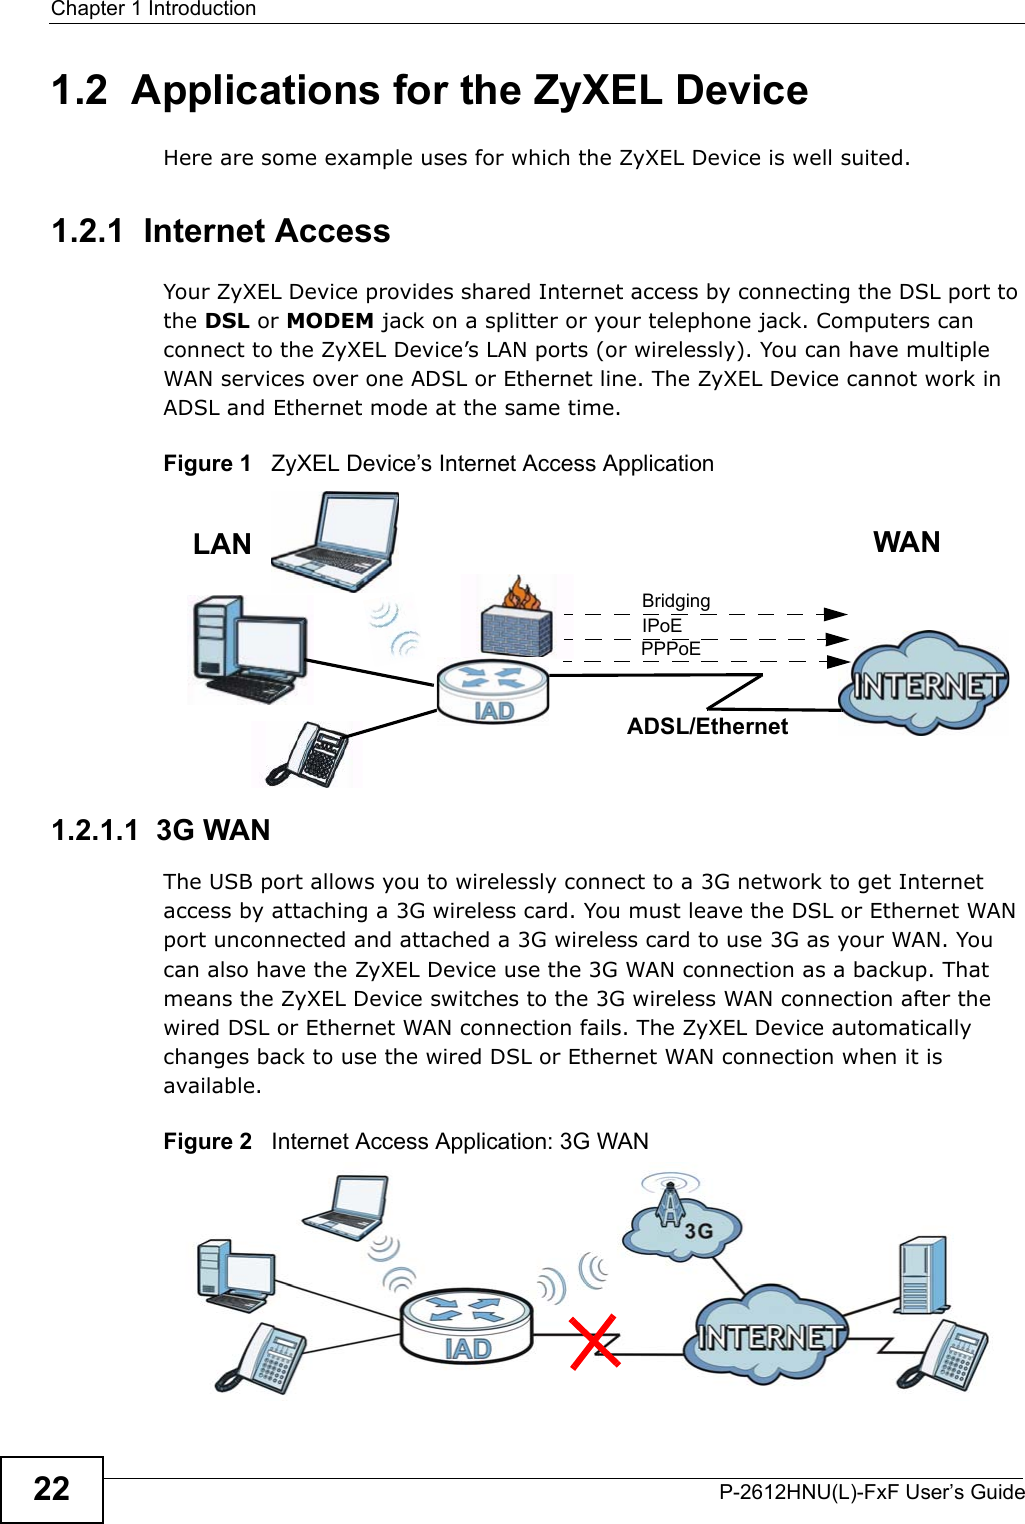 Chapter 1 IntroductionP-2612HNU(L)-FxF User’s Guide221.2  Applications for the ZyXEL DeviceHere are some example uses for which the ZyXEL Device is well suited.1.2.1  Internet AccessYour ZyXEL Device provides shared Internet access by connecting the DSL port to the DSL or MODEM jack on a splitter or your telephone jack. Computers can connect to the ZyXEL Device’s LAN ports (or wirelessly). You can have multiple WAN services over one ADSL or Ethernet line. The ZyXEL Device cannot work inADSL and Ethernet mode at the same time. Figure 1   ZyXEL Device’s Internet Access Application1.2.1.1  3G WANThe USB port allows you to wirelessly connect to a 3G network to get Internetaccess by attaching a 3G wireless card. You must leave the DSL or Ethernet WAN port unconnected and attached a 3G wireless card to use 3G as your WAN. You can also have the ZyXEL Device use the 3G WAN connection as a backup. That means the ZyXEL Device switches to the 3G wireless WAN connection after the wired DSL or Ethernet WAN connection fails. The ZyXEL Device automaticallychanges back to use the wired DSL or Ethernet WAN connection when it is available.Figure 2   Internet Access Application: 3G WAN LANPPPoEIPoEBridging WANADSL/Ethernet